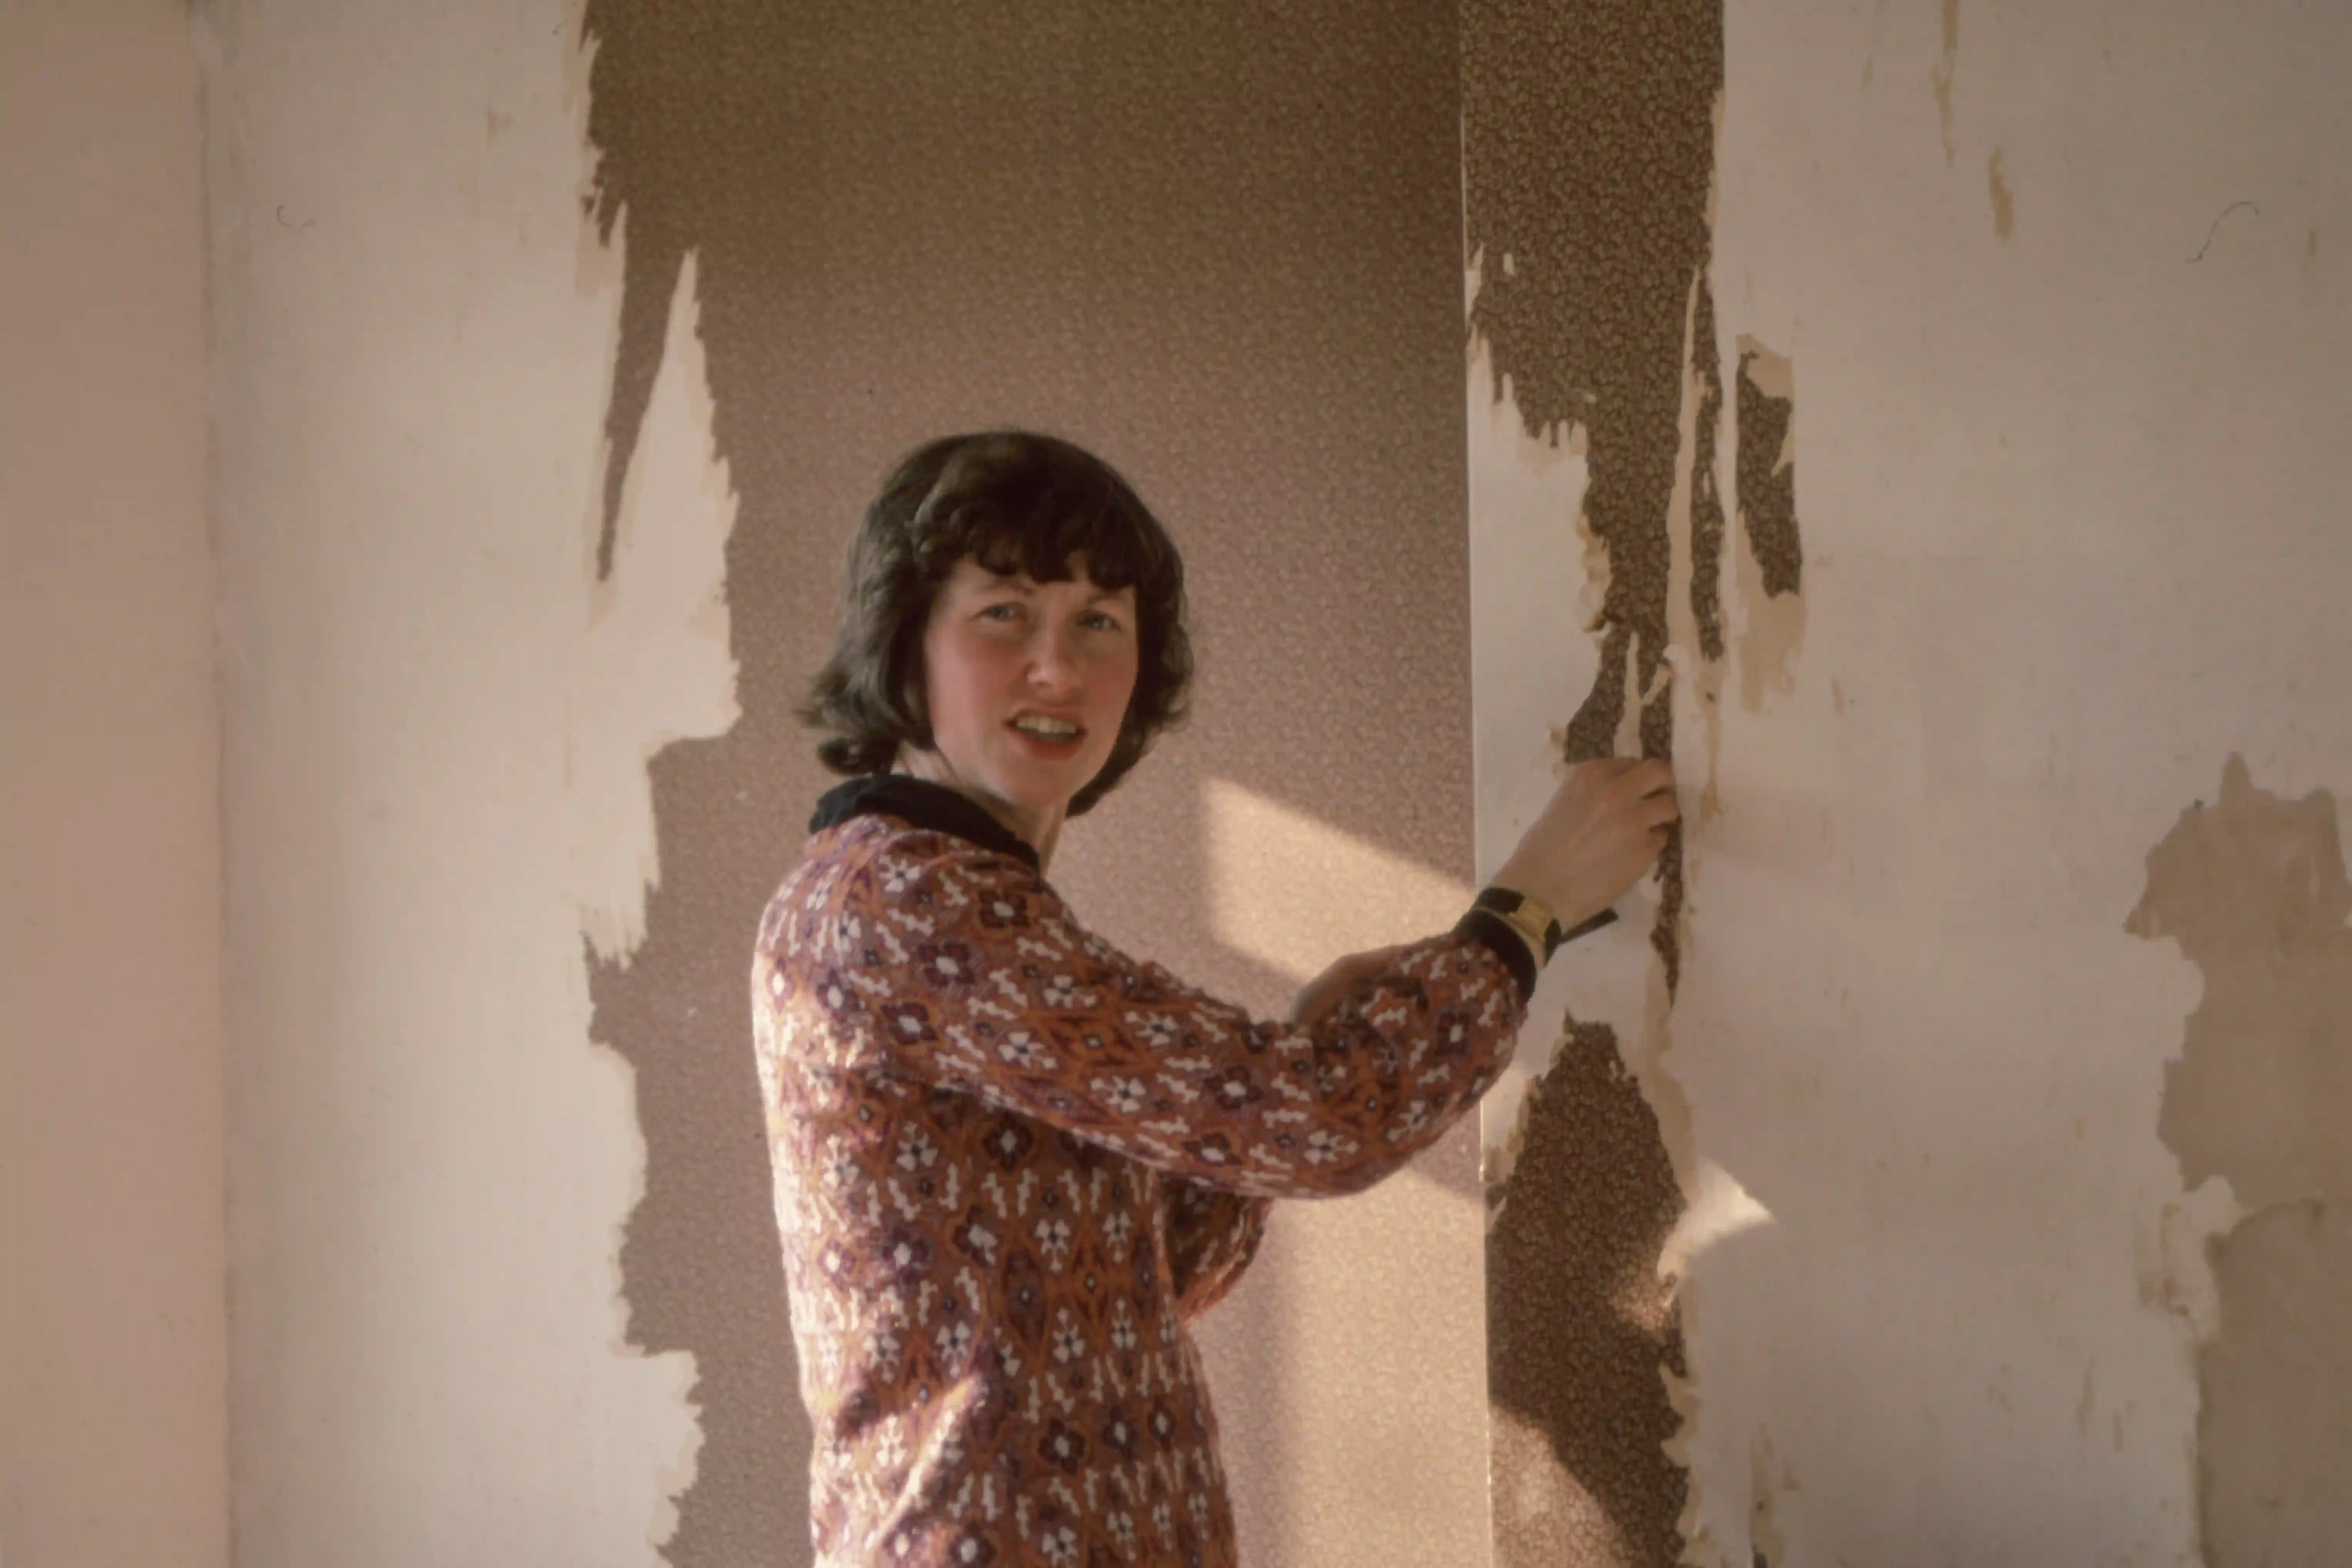 

A picture of a person wearing a tool belt and hard hat, standing in a newly renovated room with fresh paint and new furniture.